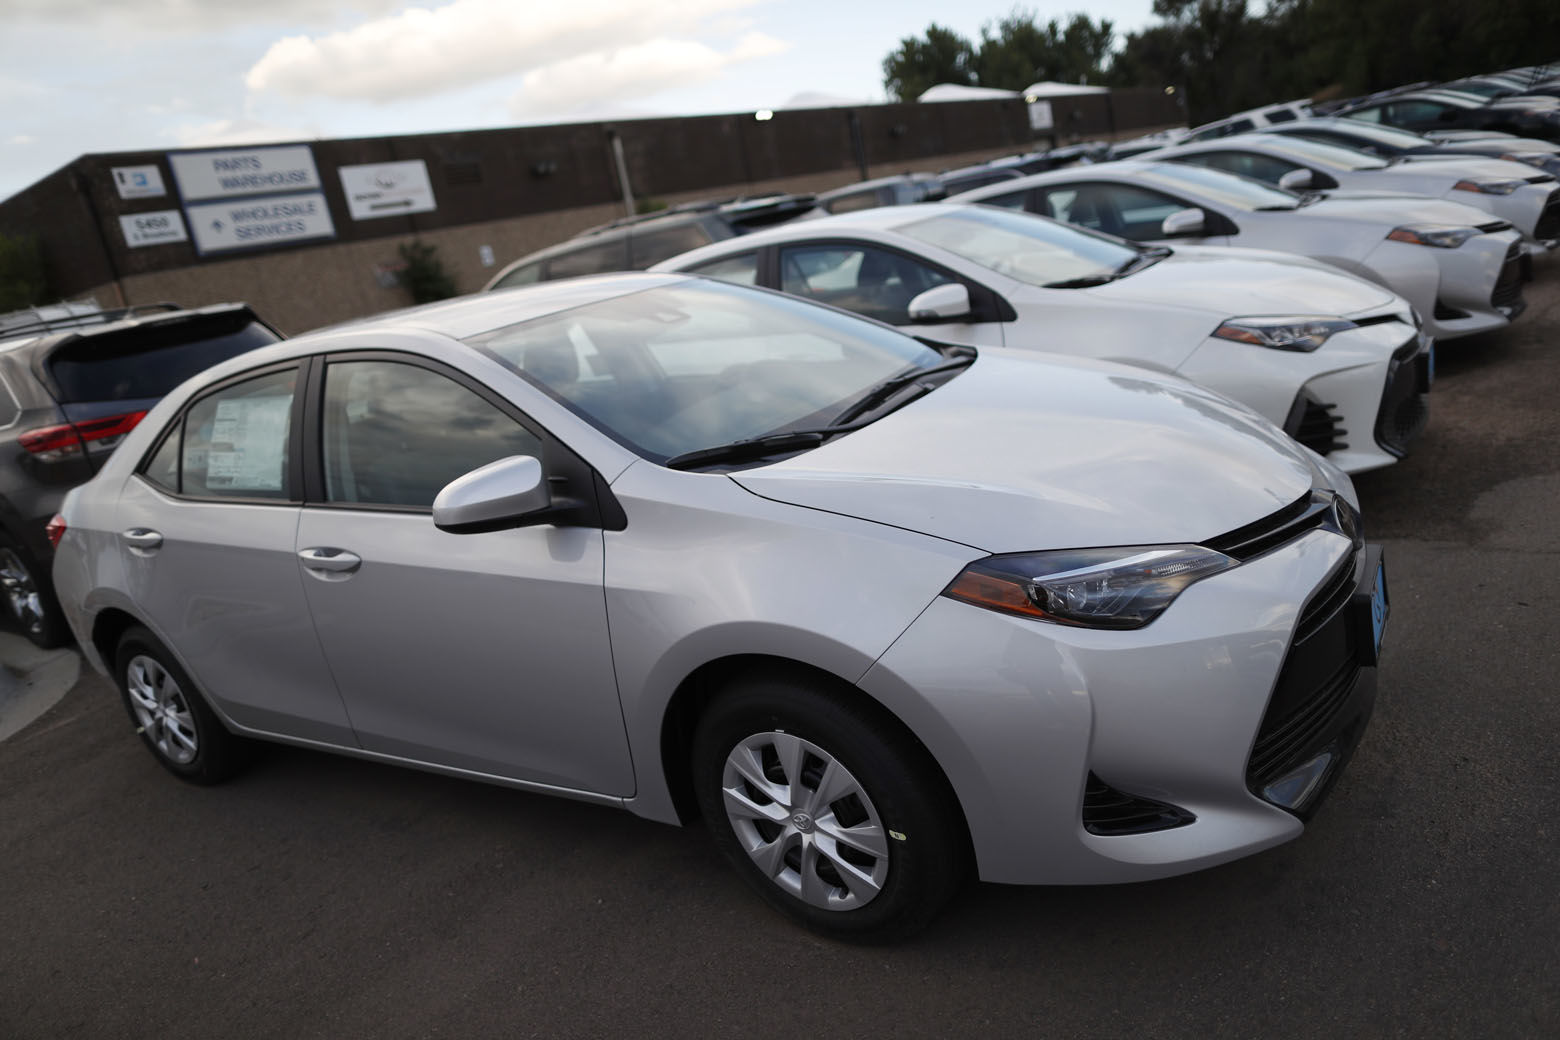 In this Sunday, June 24, 2018, photograph, unsold 2018 Corolla sedans sit at a Toyota dealership in Englewood, Colo. (AP Photo/David Zalubowski)